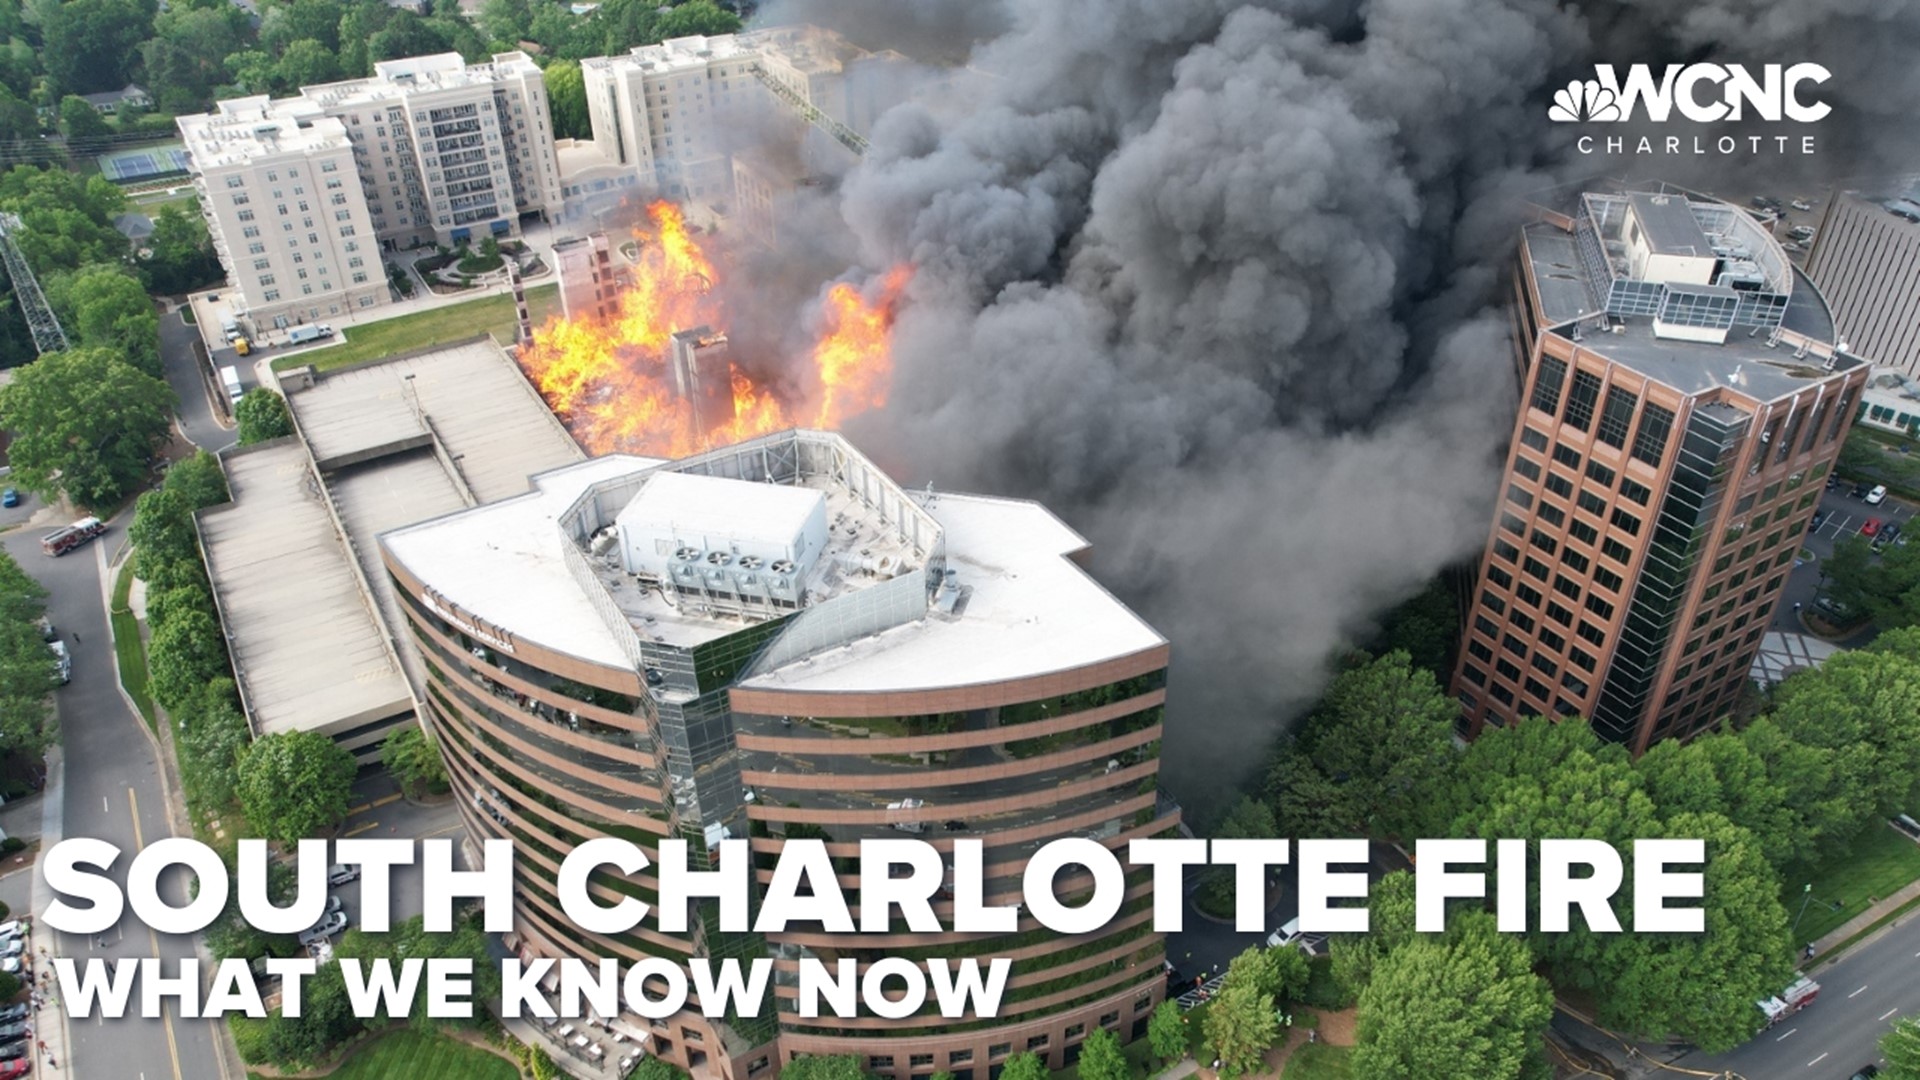 Julia Kauffman shares the most up-to-date information available on this deadly blaze.